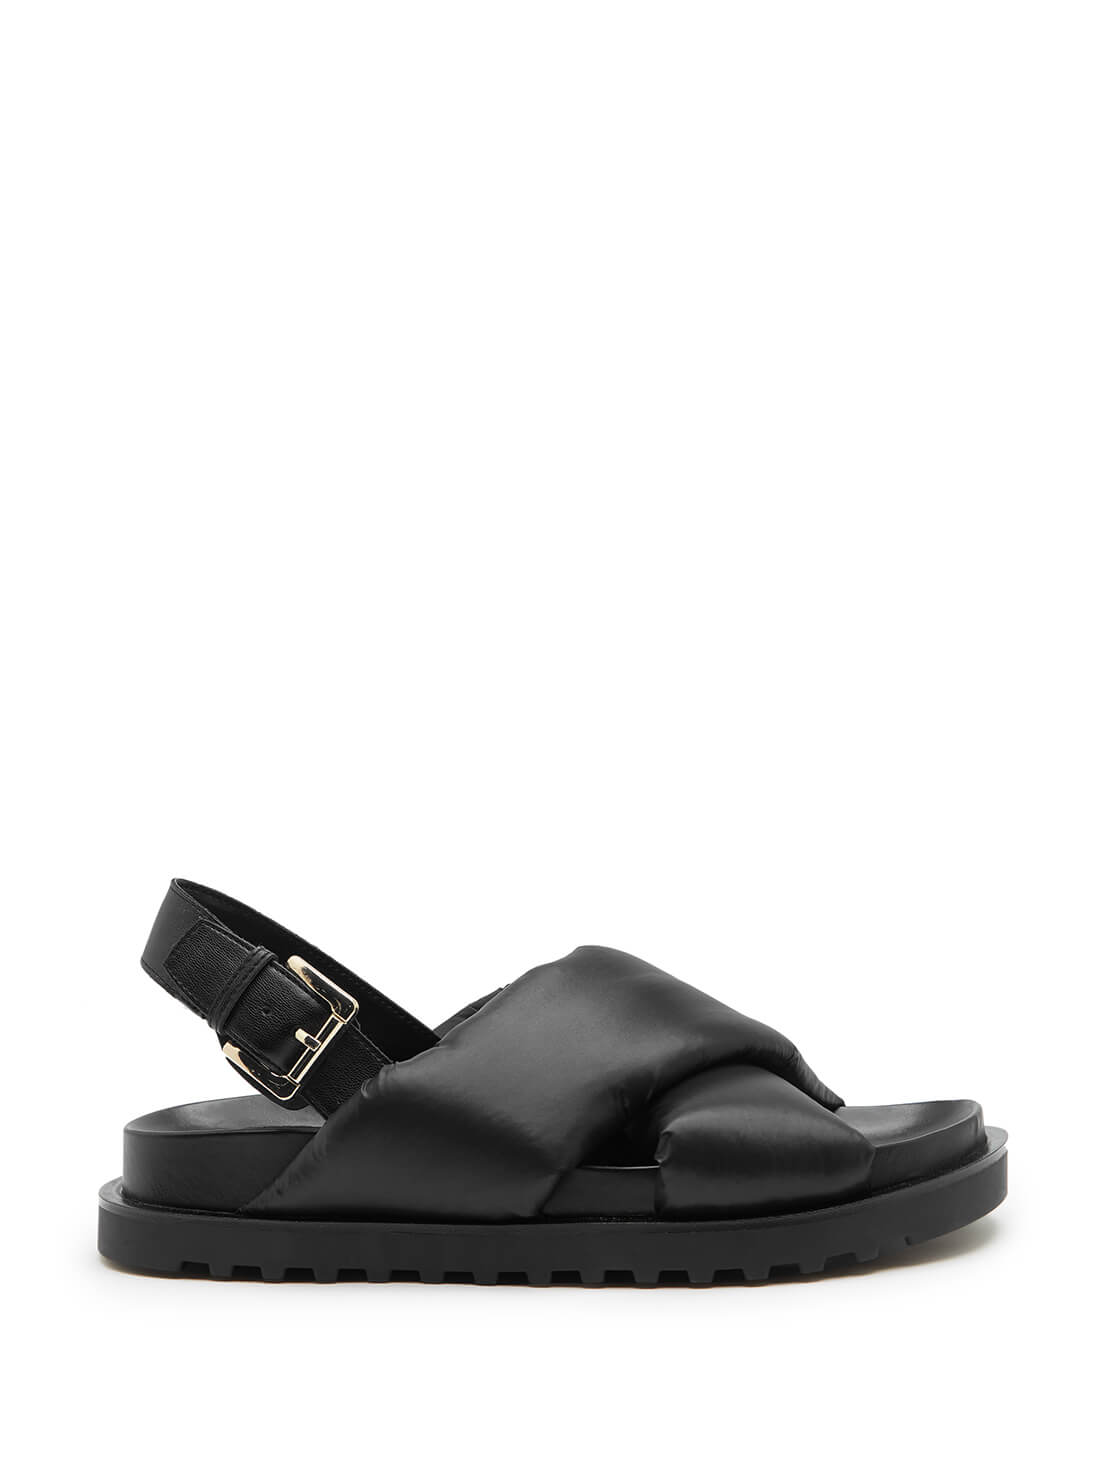 GUESS Womens Black Quilted Fabulus Flat Sandals FABULUS-A Side View